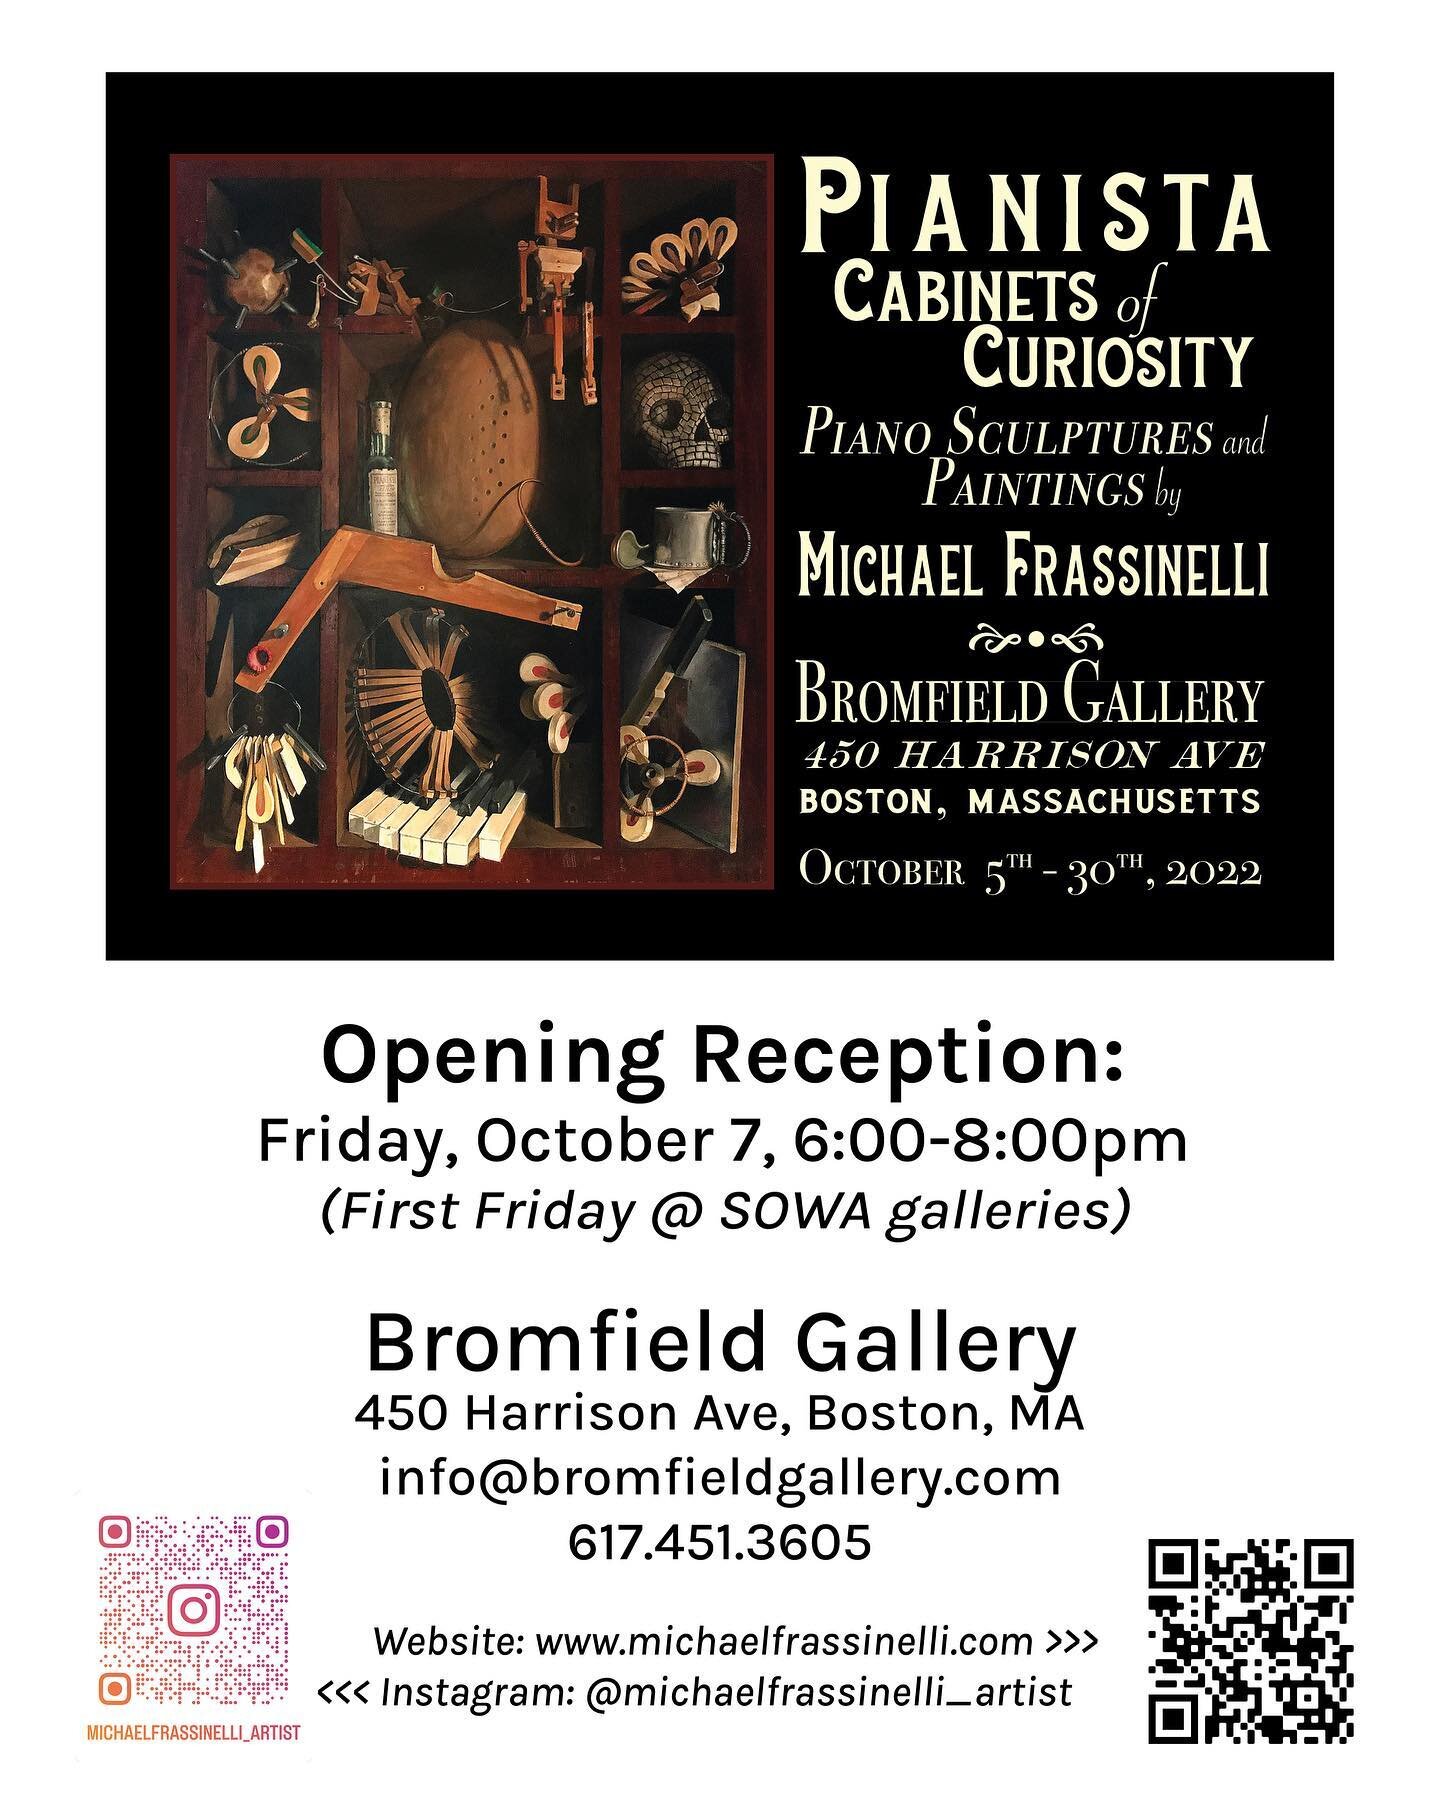 Countdown to Opening Reception @bromfieldgallery in Boston, First Friday, October 7th, 6-8pm, of &ldquo;Pianista Cabinets of Curiosities&rdquo; paintings and piano sculptures from my recent sabbatical, Jan-June 2022,